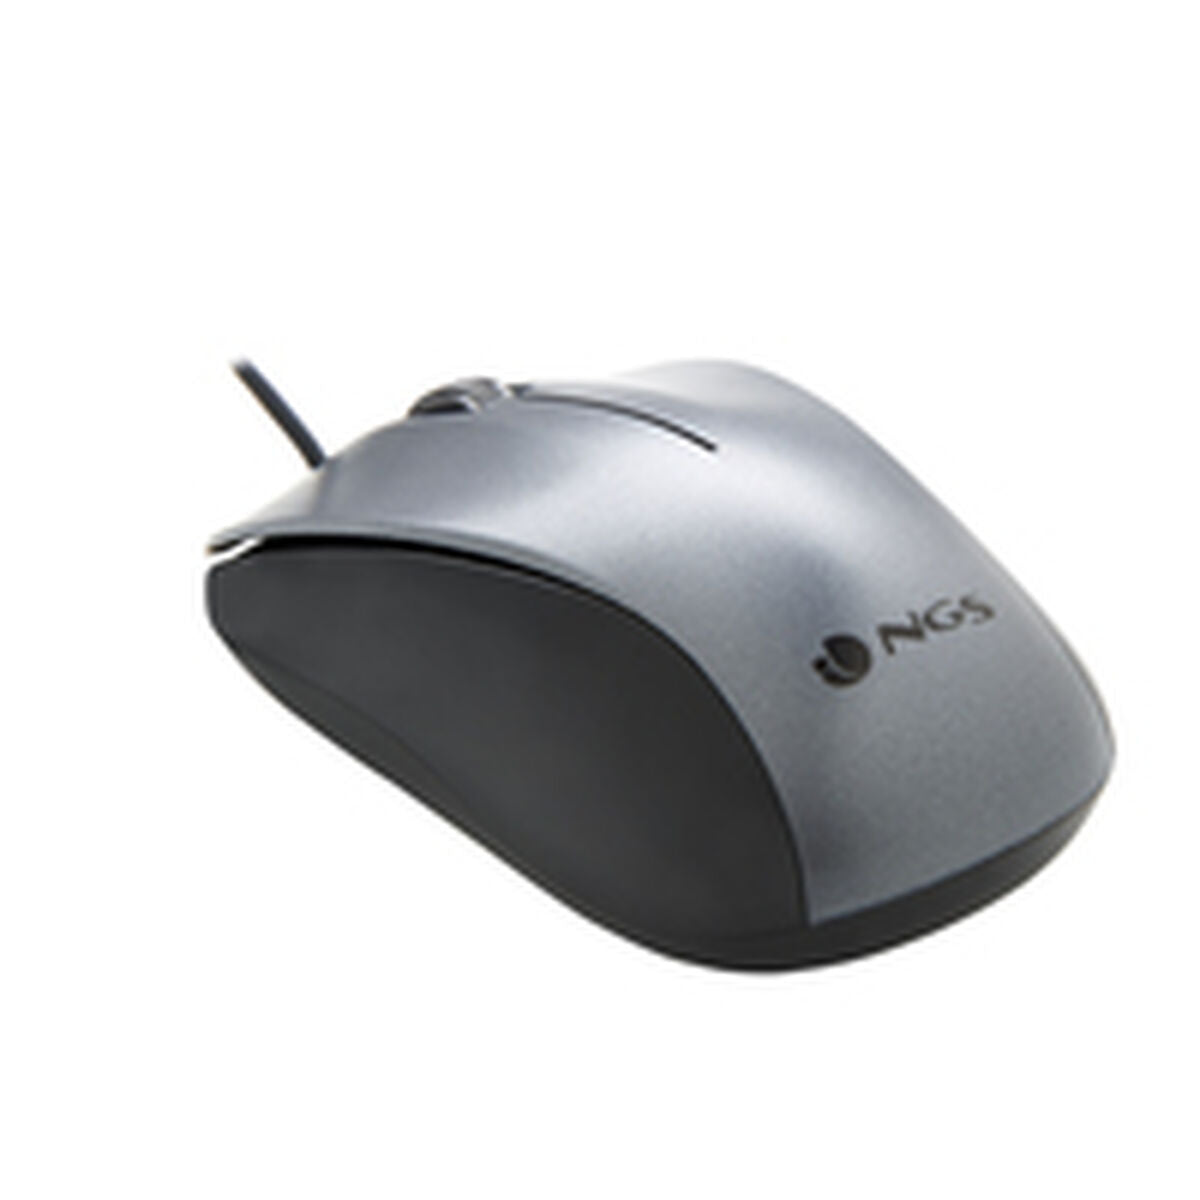 Optical mouse NGS NGS-MOUSE-1091 1200 DPI Grey